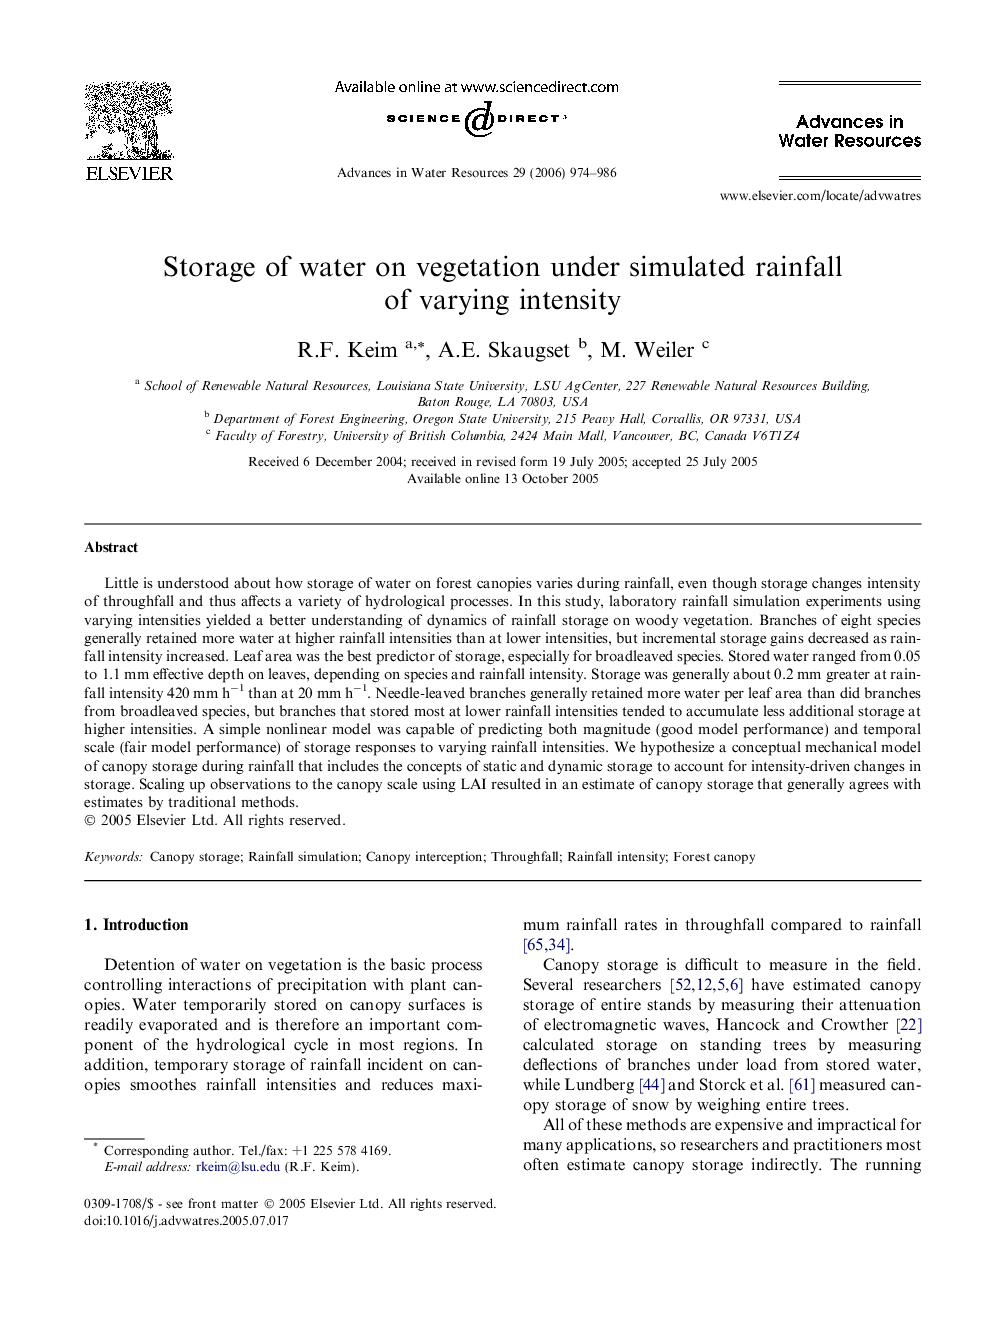 Storage of water on vegetation under simulated rainfall of varying intensity